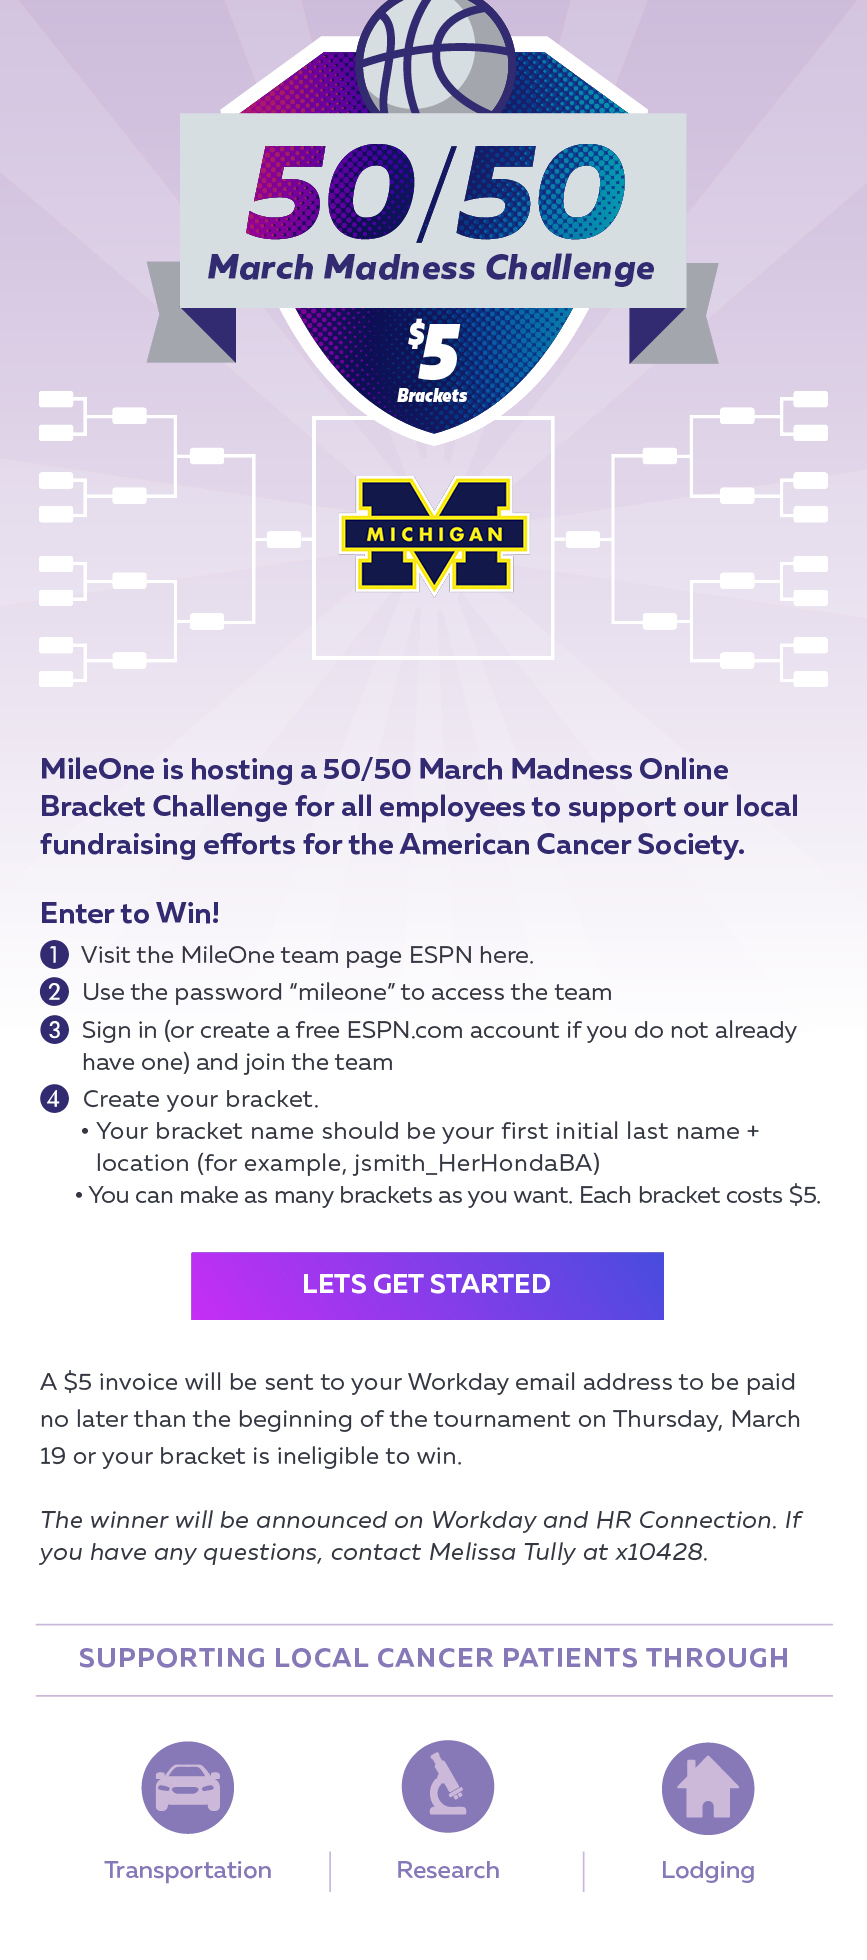 MileOne is hosting a 50/50 March Madness Online Bracket Challenge for all employees to support our local fundraising efforts for the American Cancer Society. LETS GET STARTED.